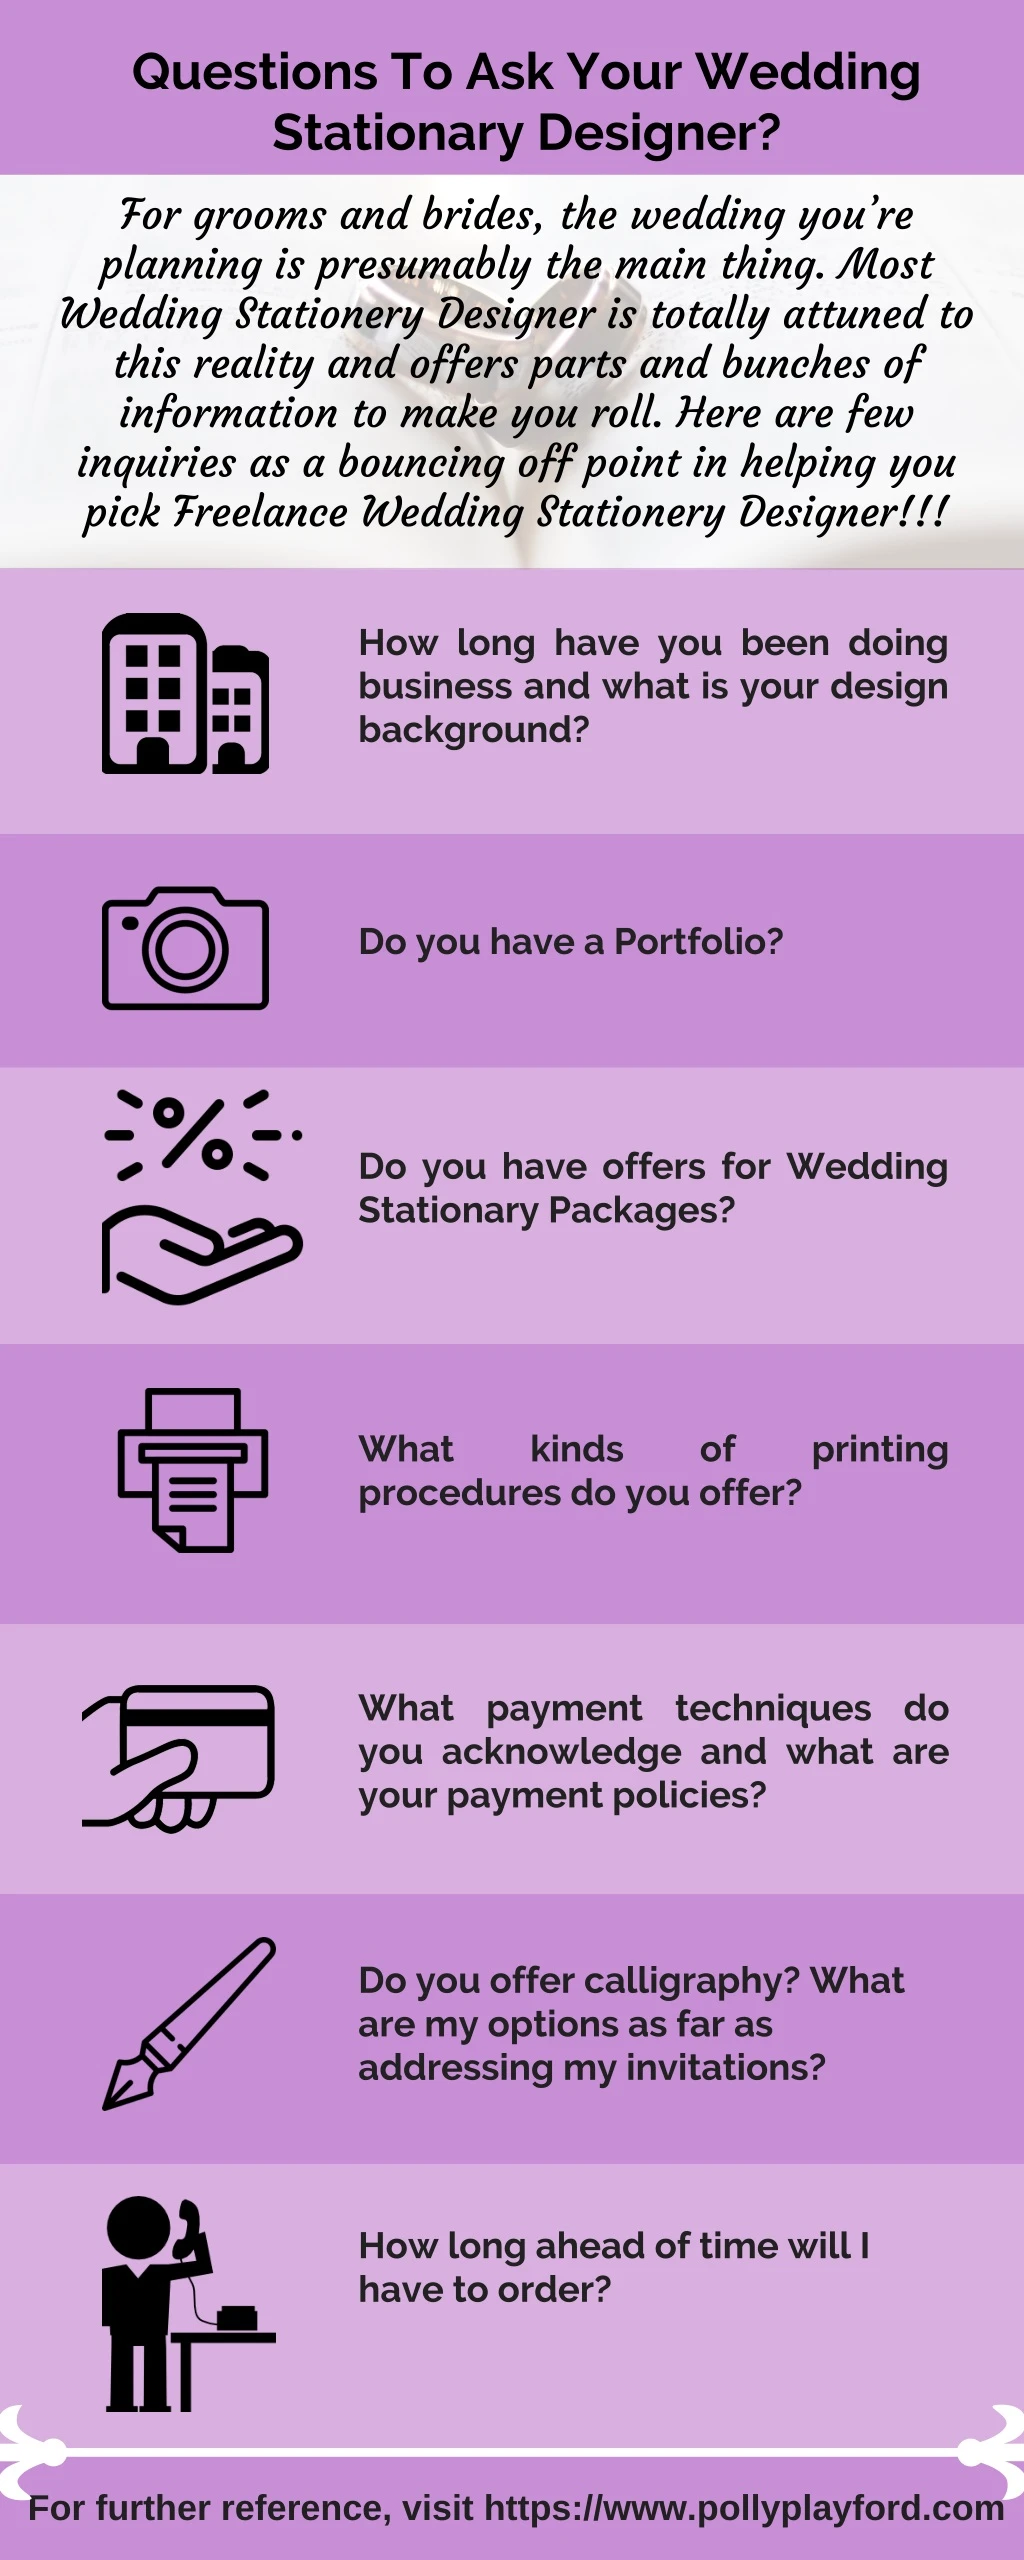 questions to ask your wedding stationary designer